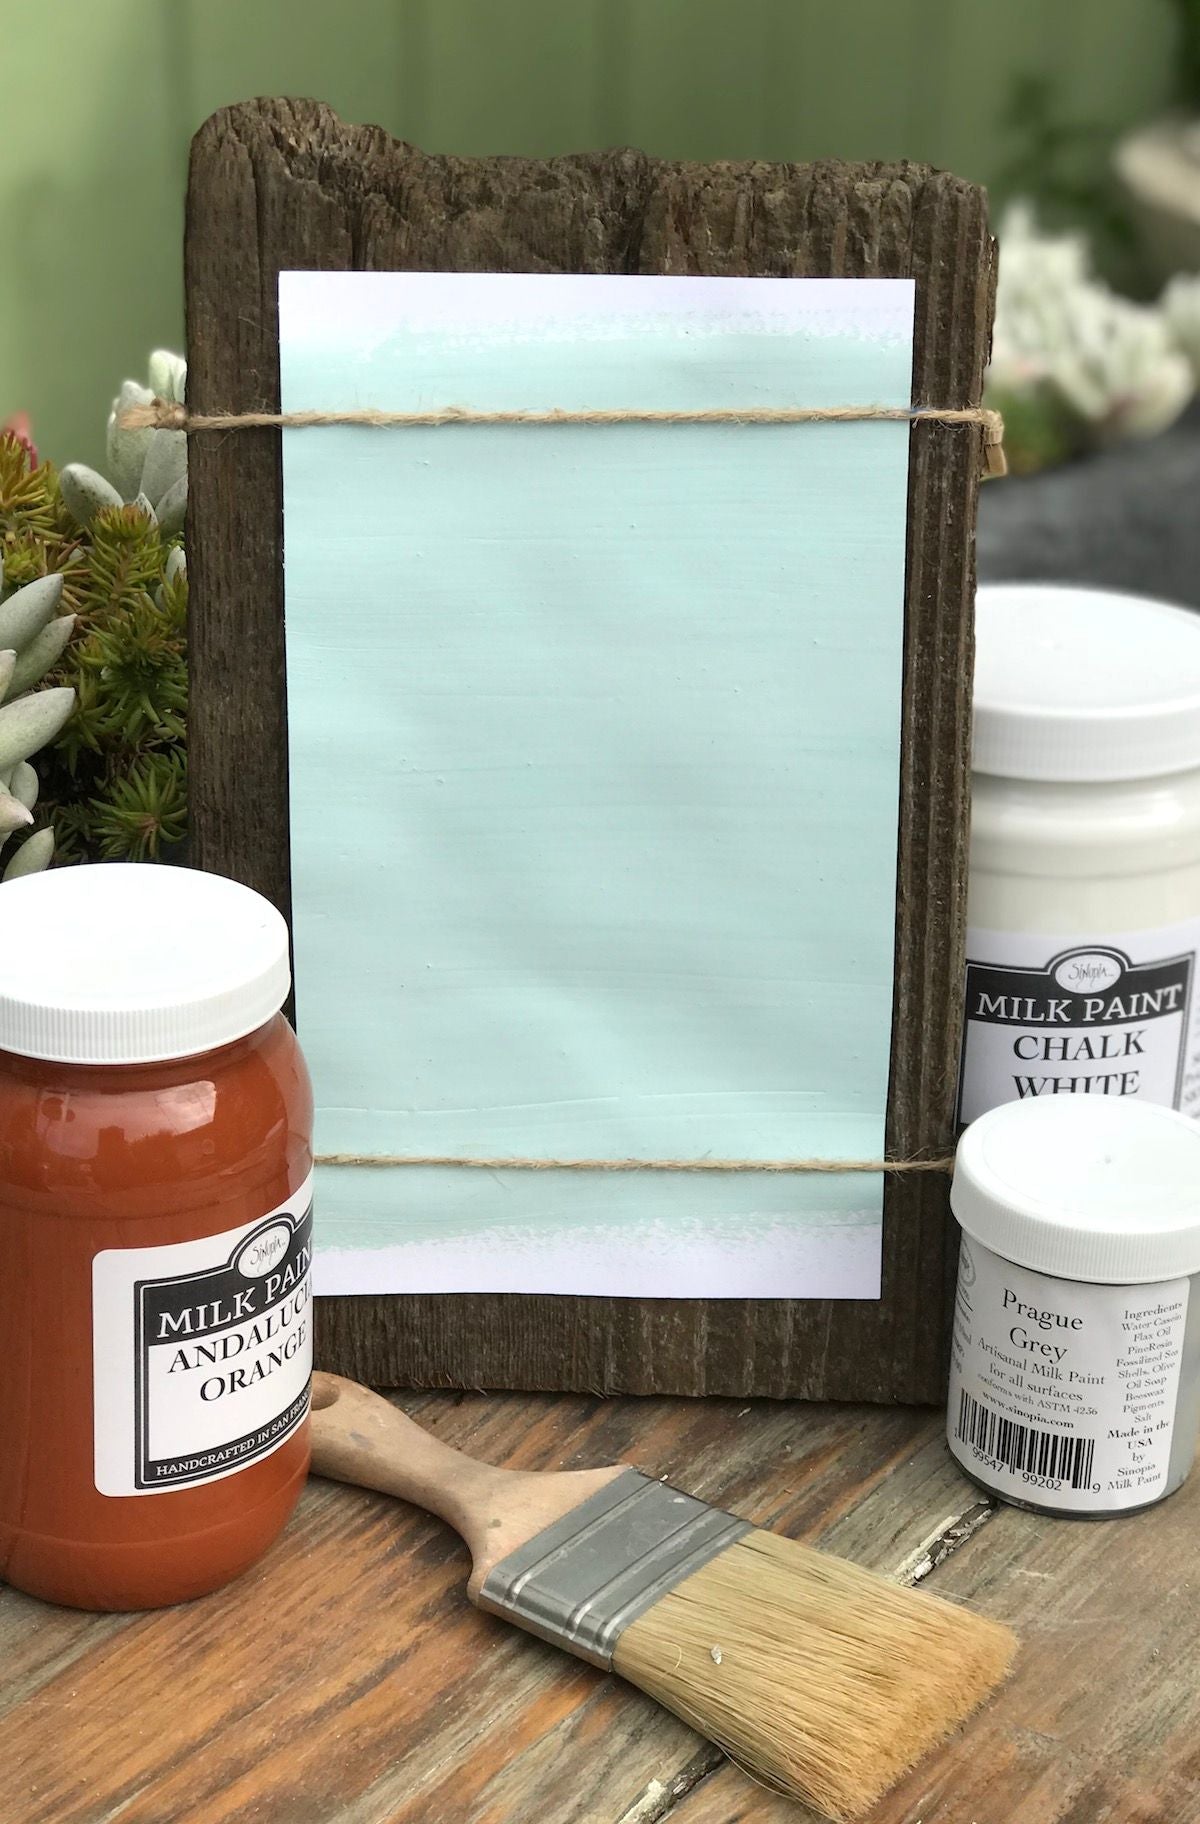 Milk Paint Rif Blue is available at Natural Art Supplies